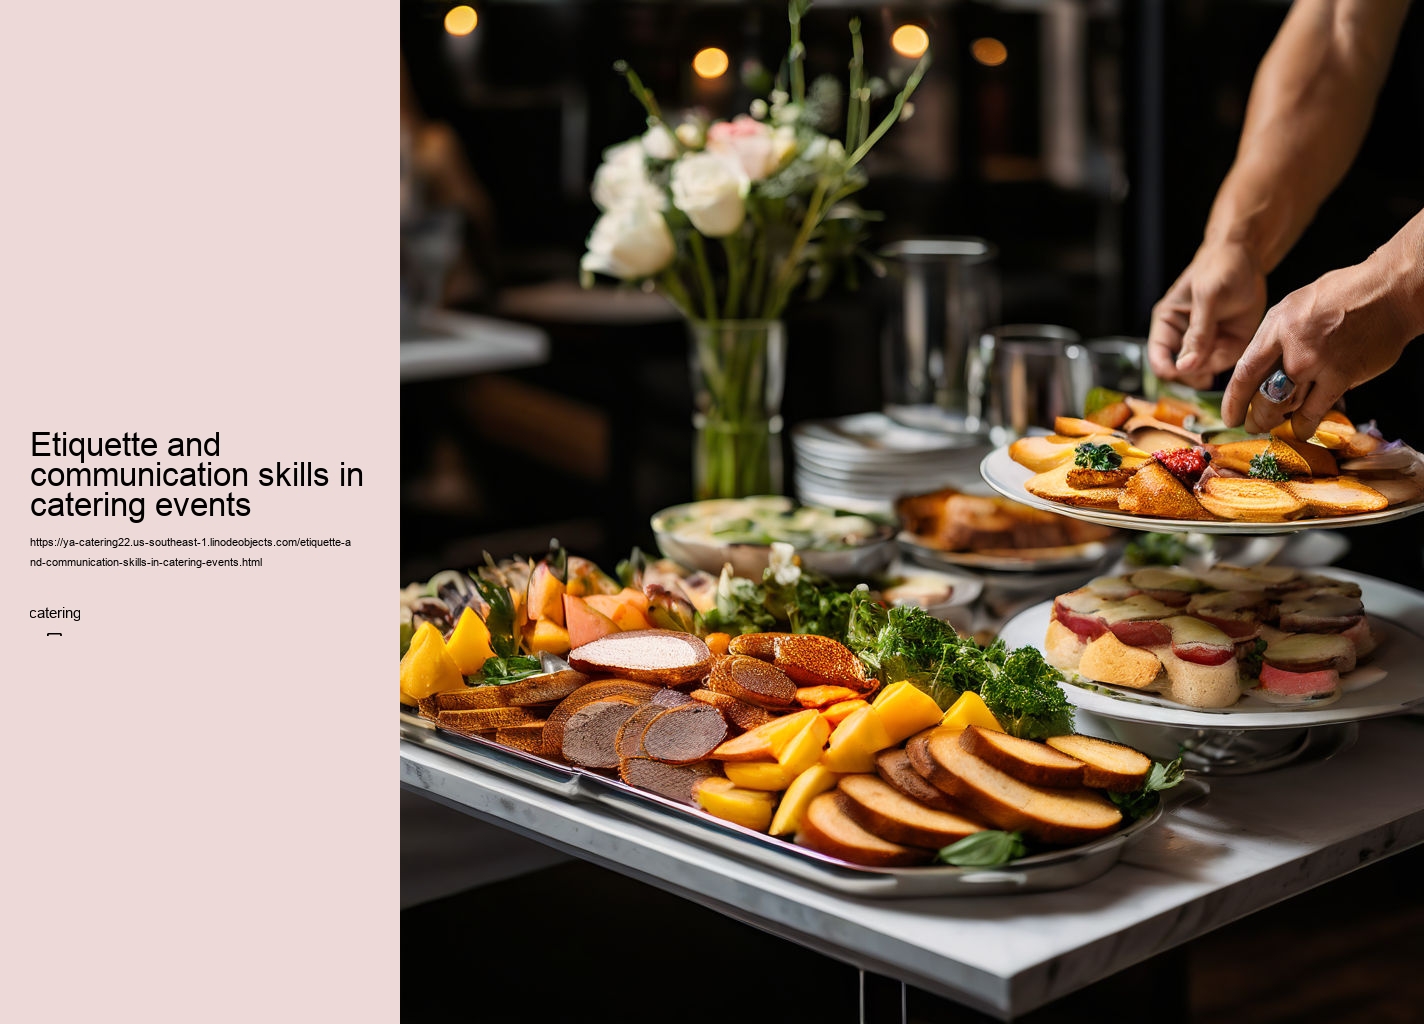 Etiquette and communication skills in catering events